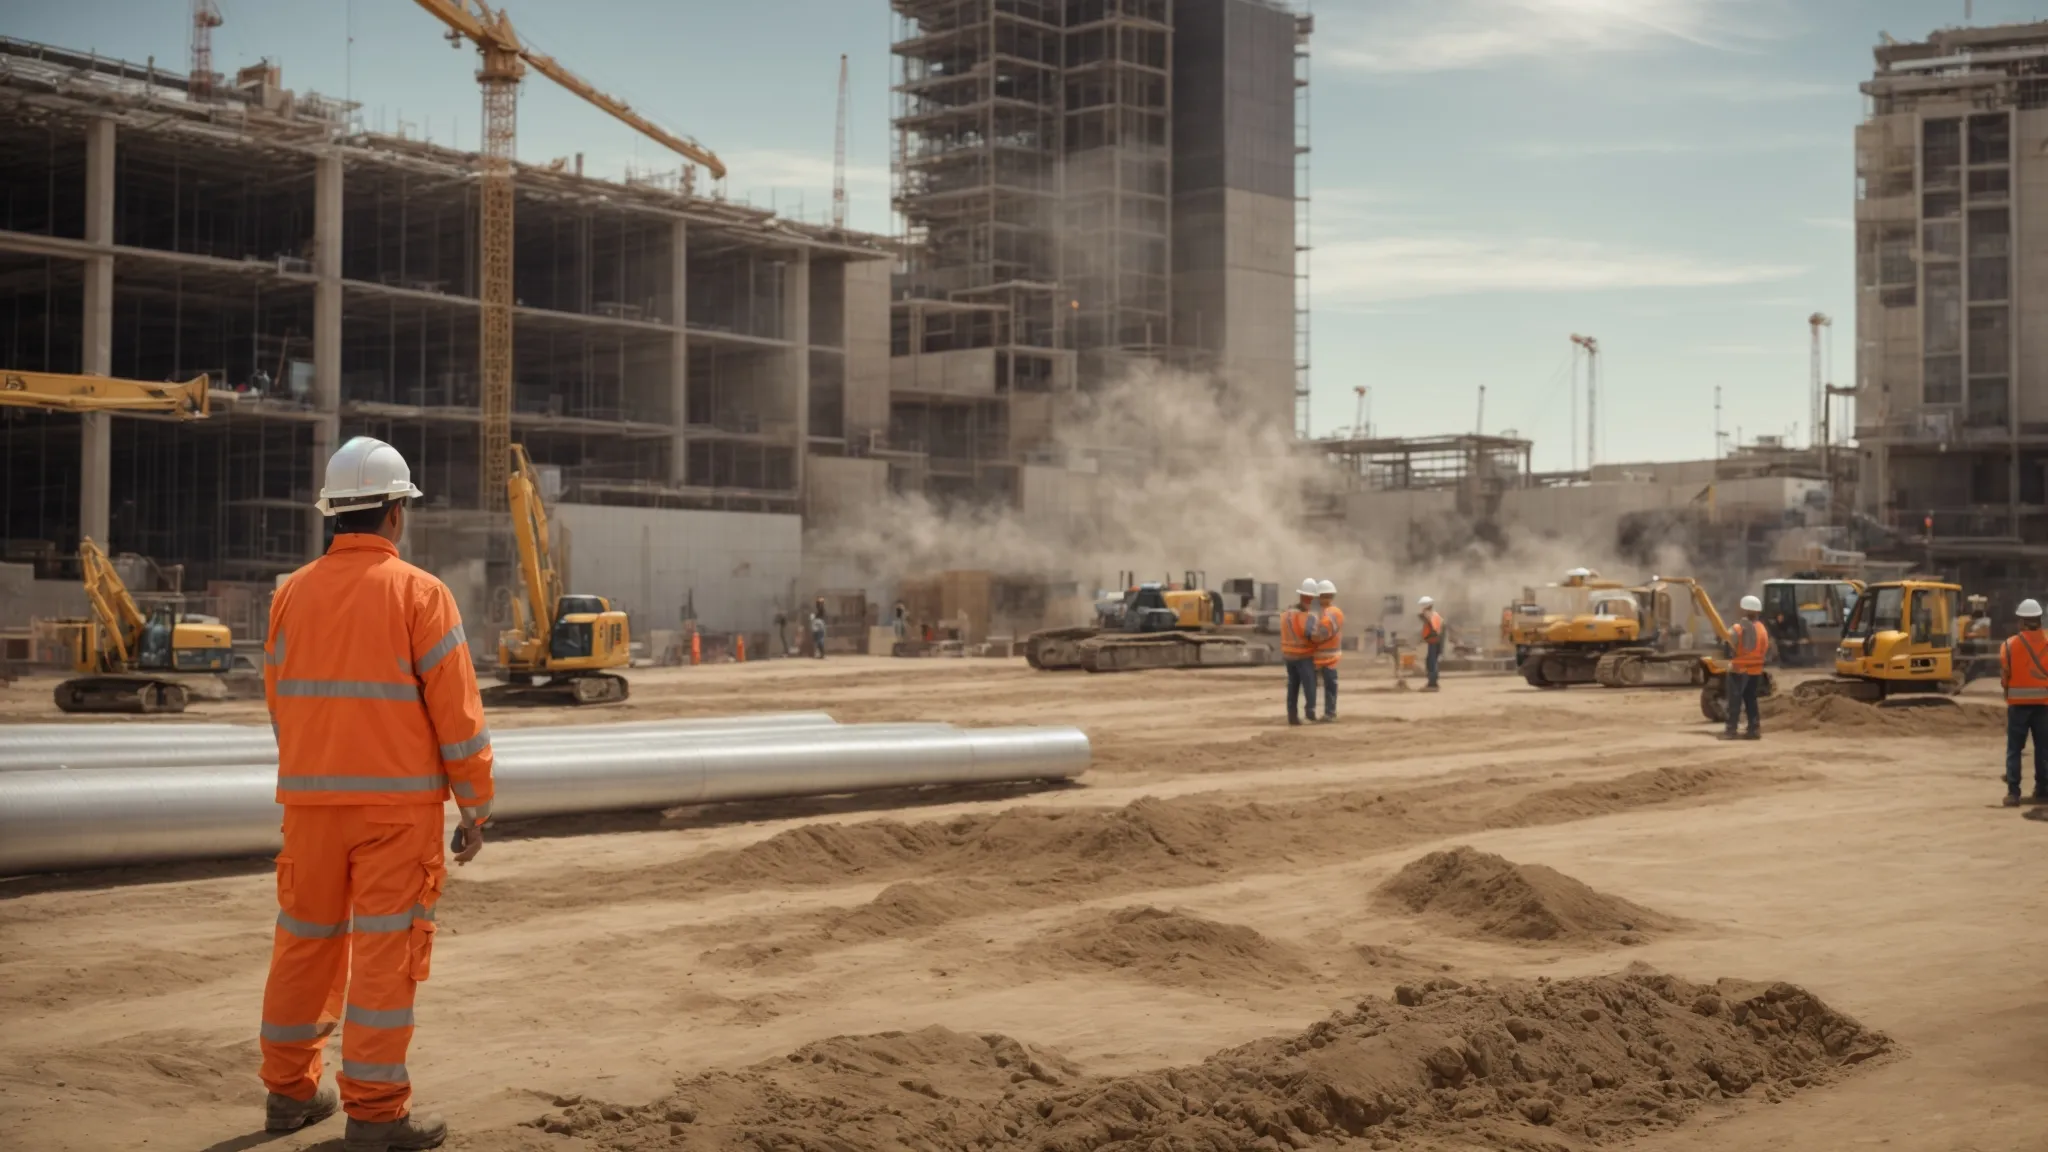 create an image of a construction site in San Diego, with workers wearing safety gear and following regulations. Include futuristic construction equipment and technology to represent future trends and developments in the industry.